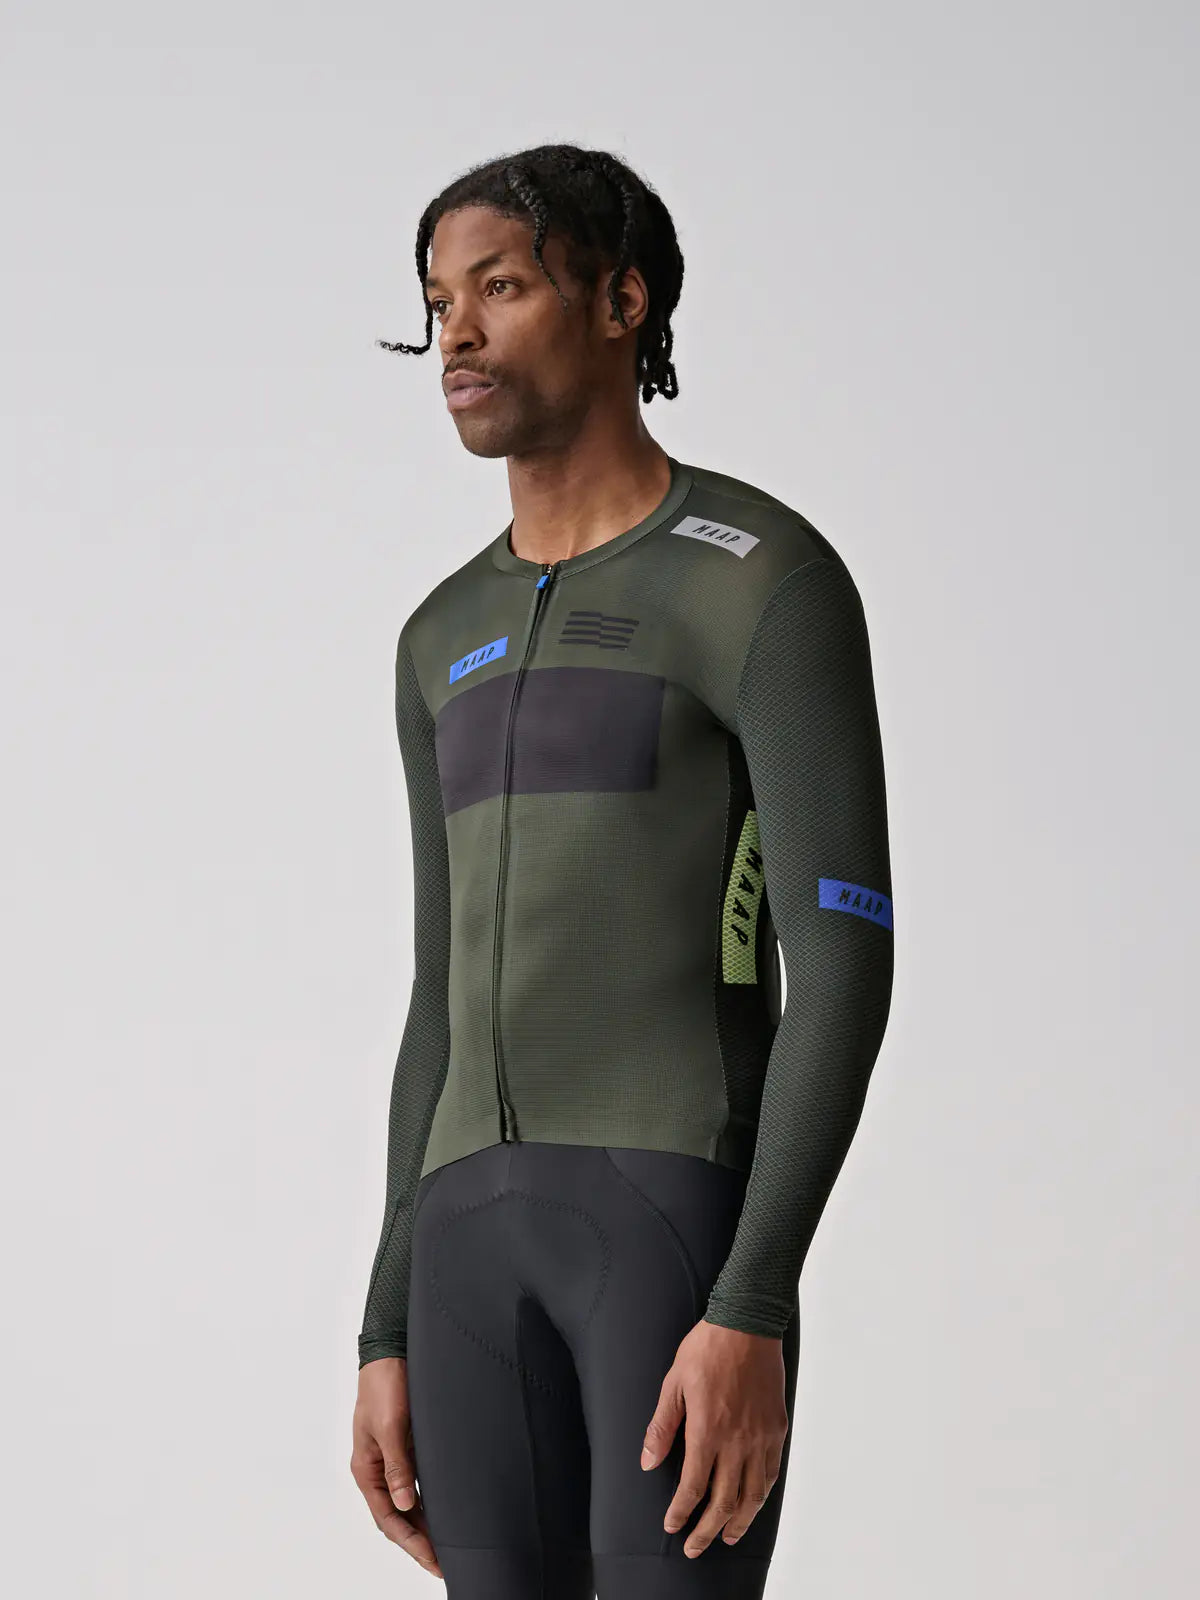 MAAP System Pro Air LS Jersey Bronze Green メンズ 長袖サイクル